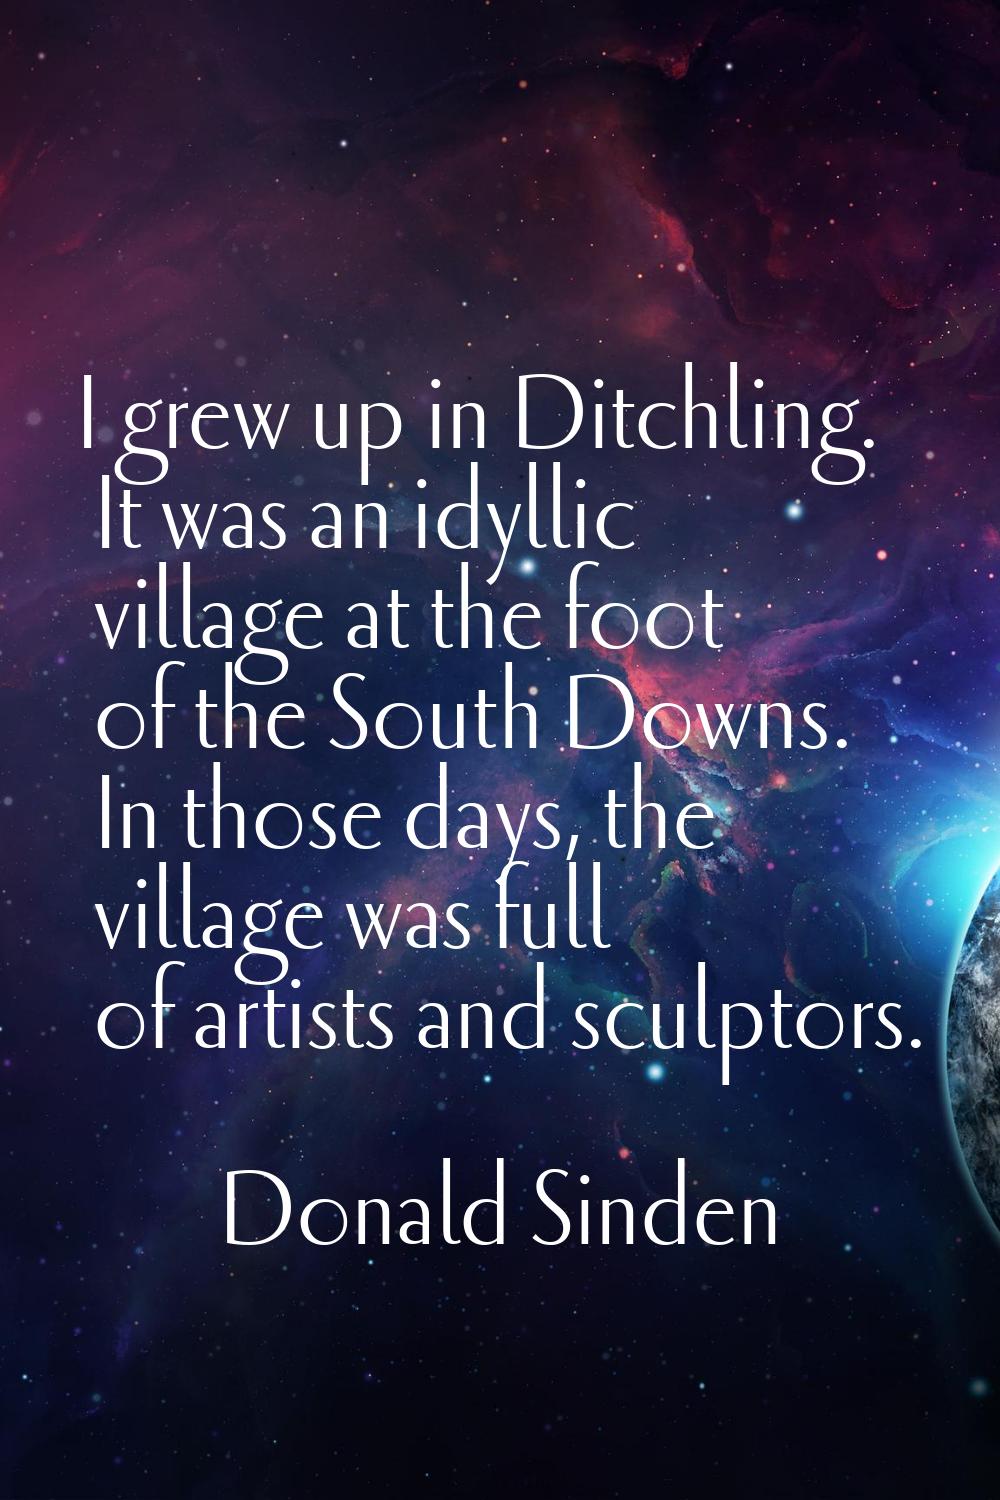 I grew up in Ditchling. It was an idyllic village at the foot of the South Downs. In those days, th